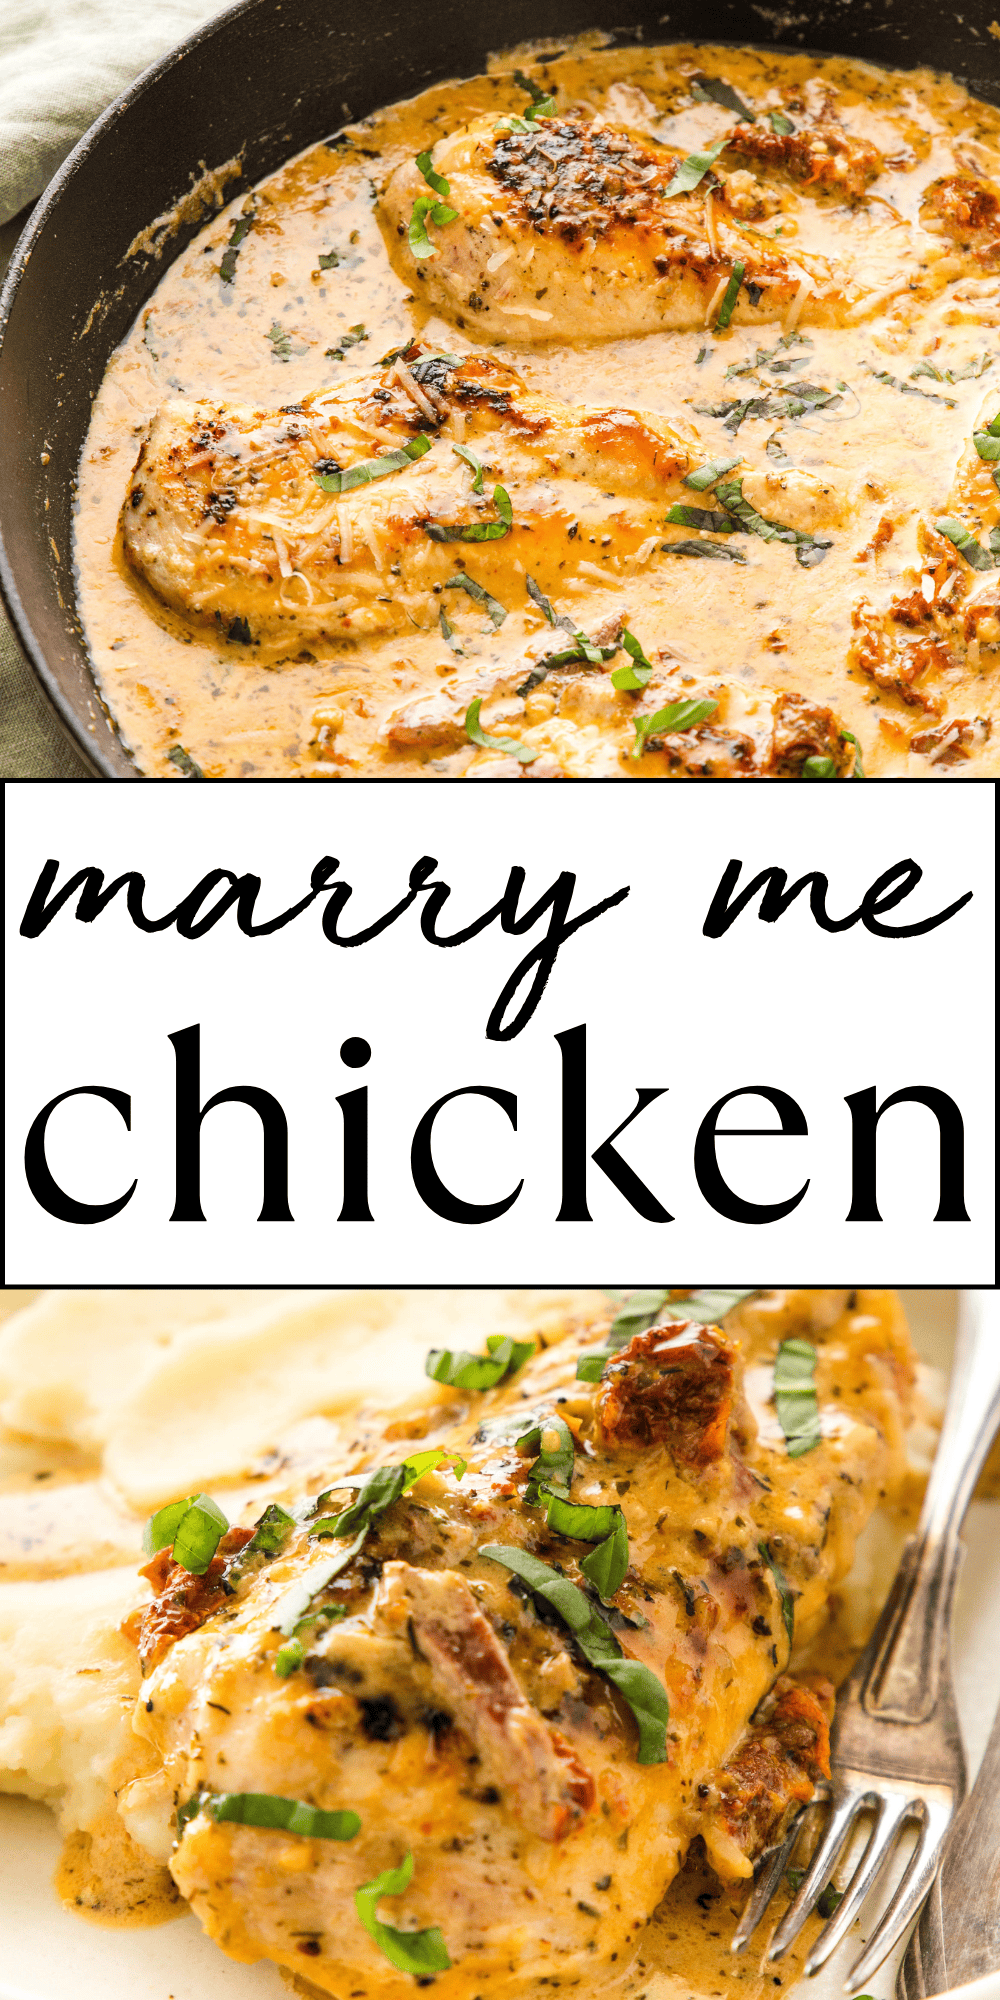 This easy Marry Me Chicken recipe is the BEST date-night main dish. Tender, creamy chicken in a simple sun-dried tomato cream sauce, ready in under 30 minutes. Recipe from thebusybaker.ca! #marrymechicken #chickenrecipe #marrymechickenrecipe #easychickenrecipe #maindish #datenightrecipe #howtomakemarrymechicken via @busybakerblog